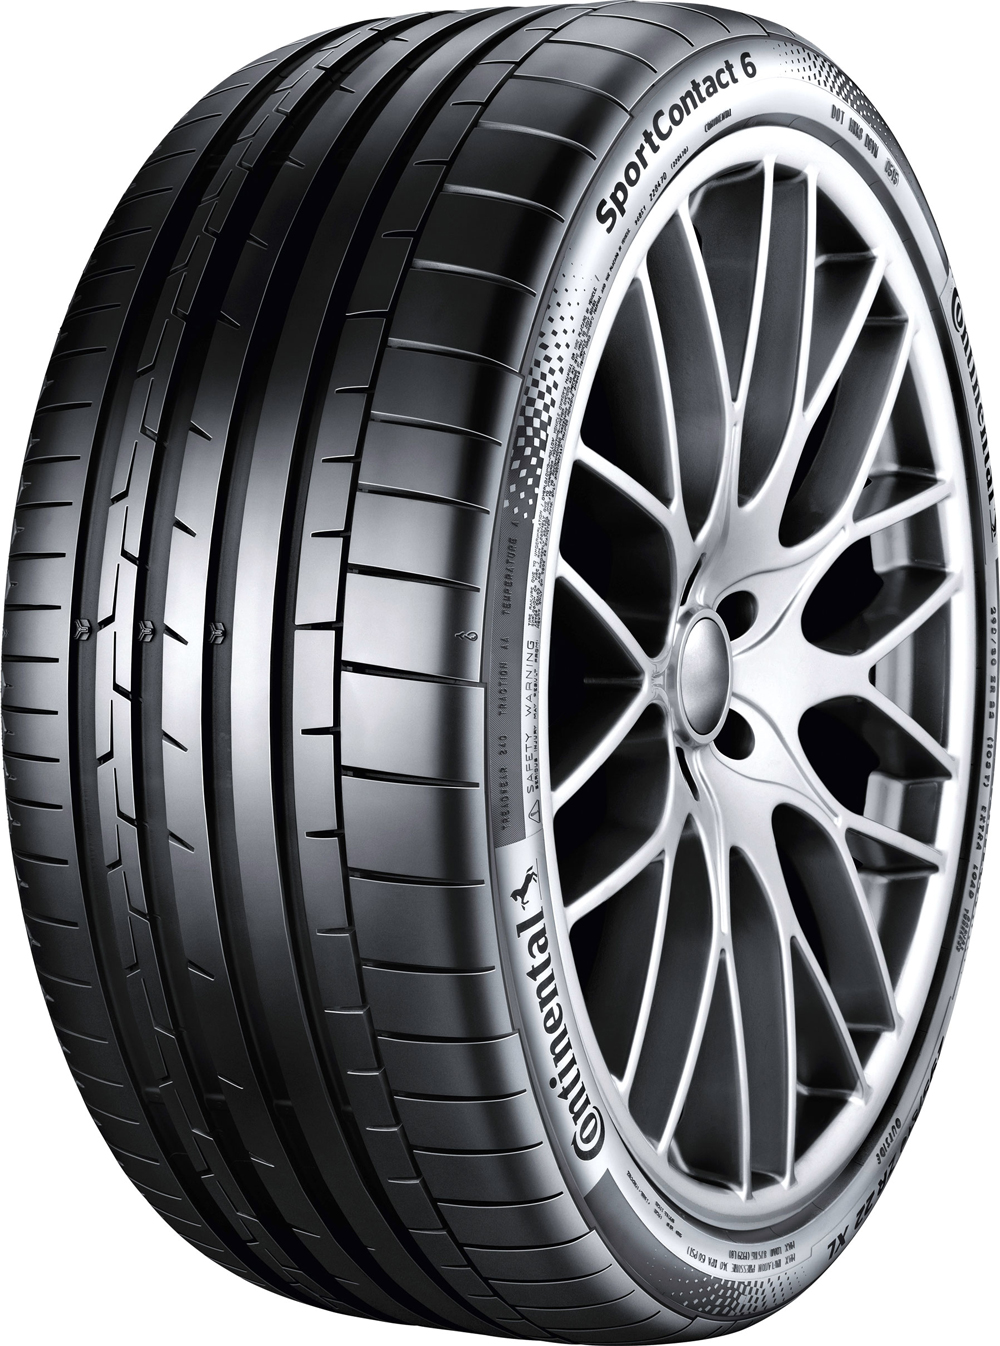 Автомобилни гуми CONTINENTAL SportContact 6 ContiSilent XL AUDI 275/35 R21 103Y